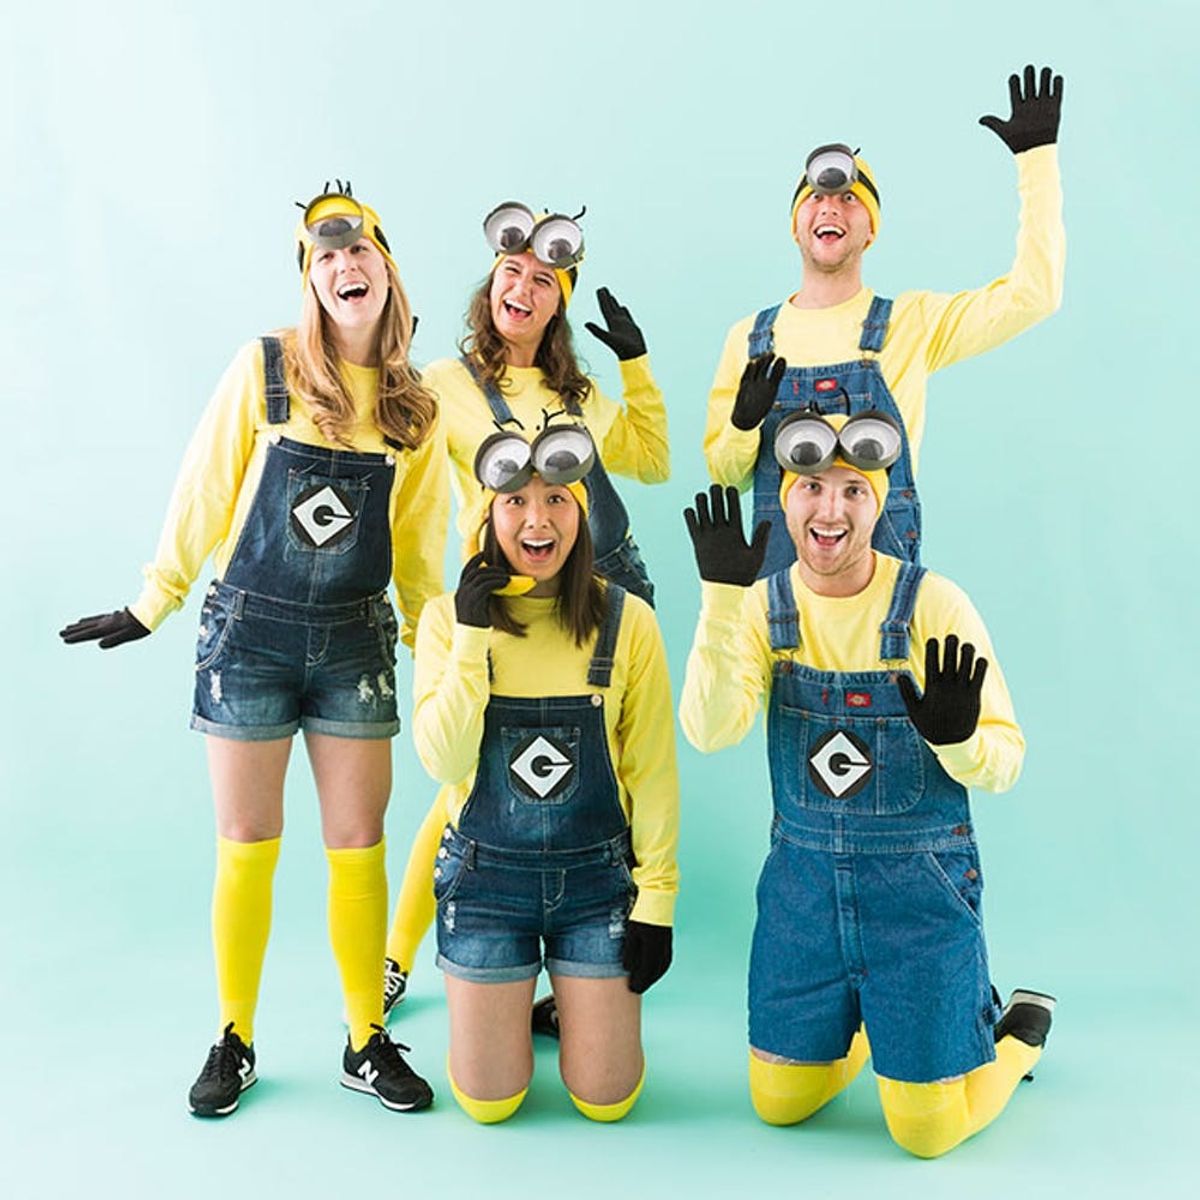 Make Minion Costumes for Your Squad This Halloween